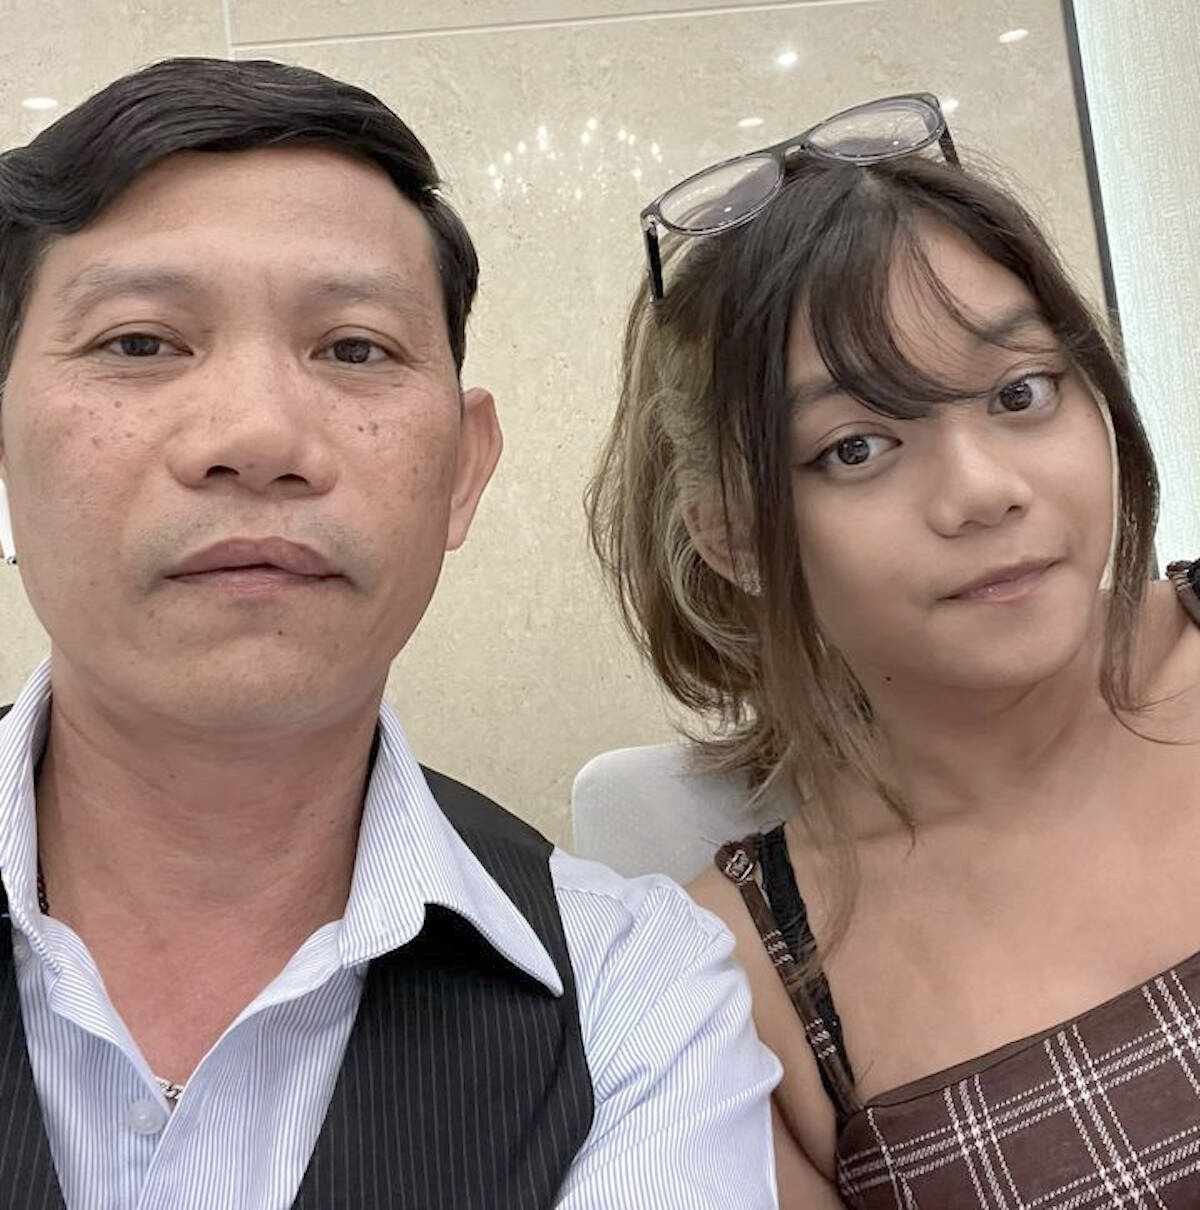 Ut Van Le posted the last picture hed taken with his daughter Kathy Kim Le. Kathy, 18, from Aldergrove, was trying to get home to her family on Christmas Eve when the bus she was riding in crashed, killing her and three other people. (Courtesy of Le family - used with permission)